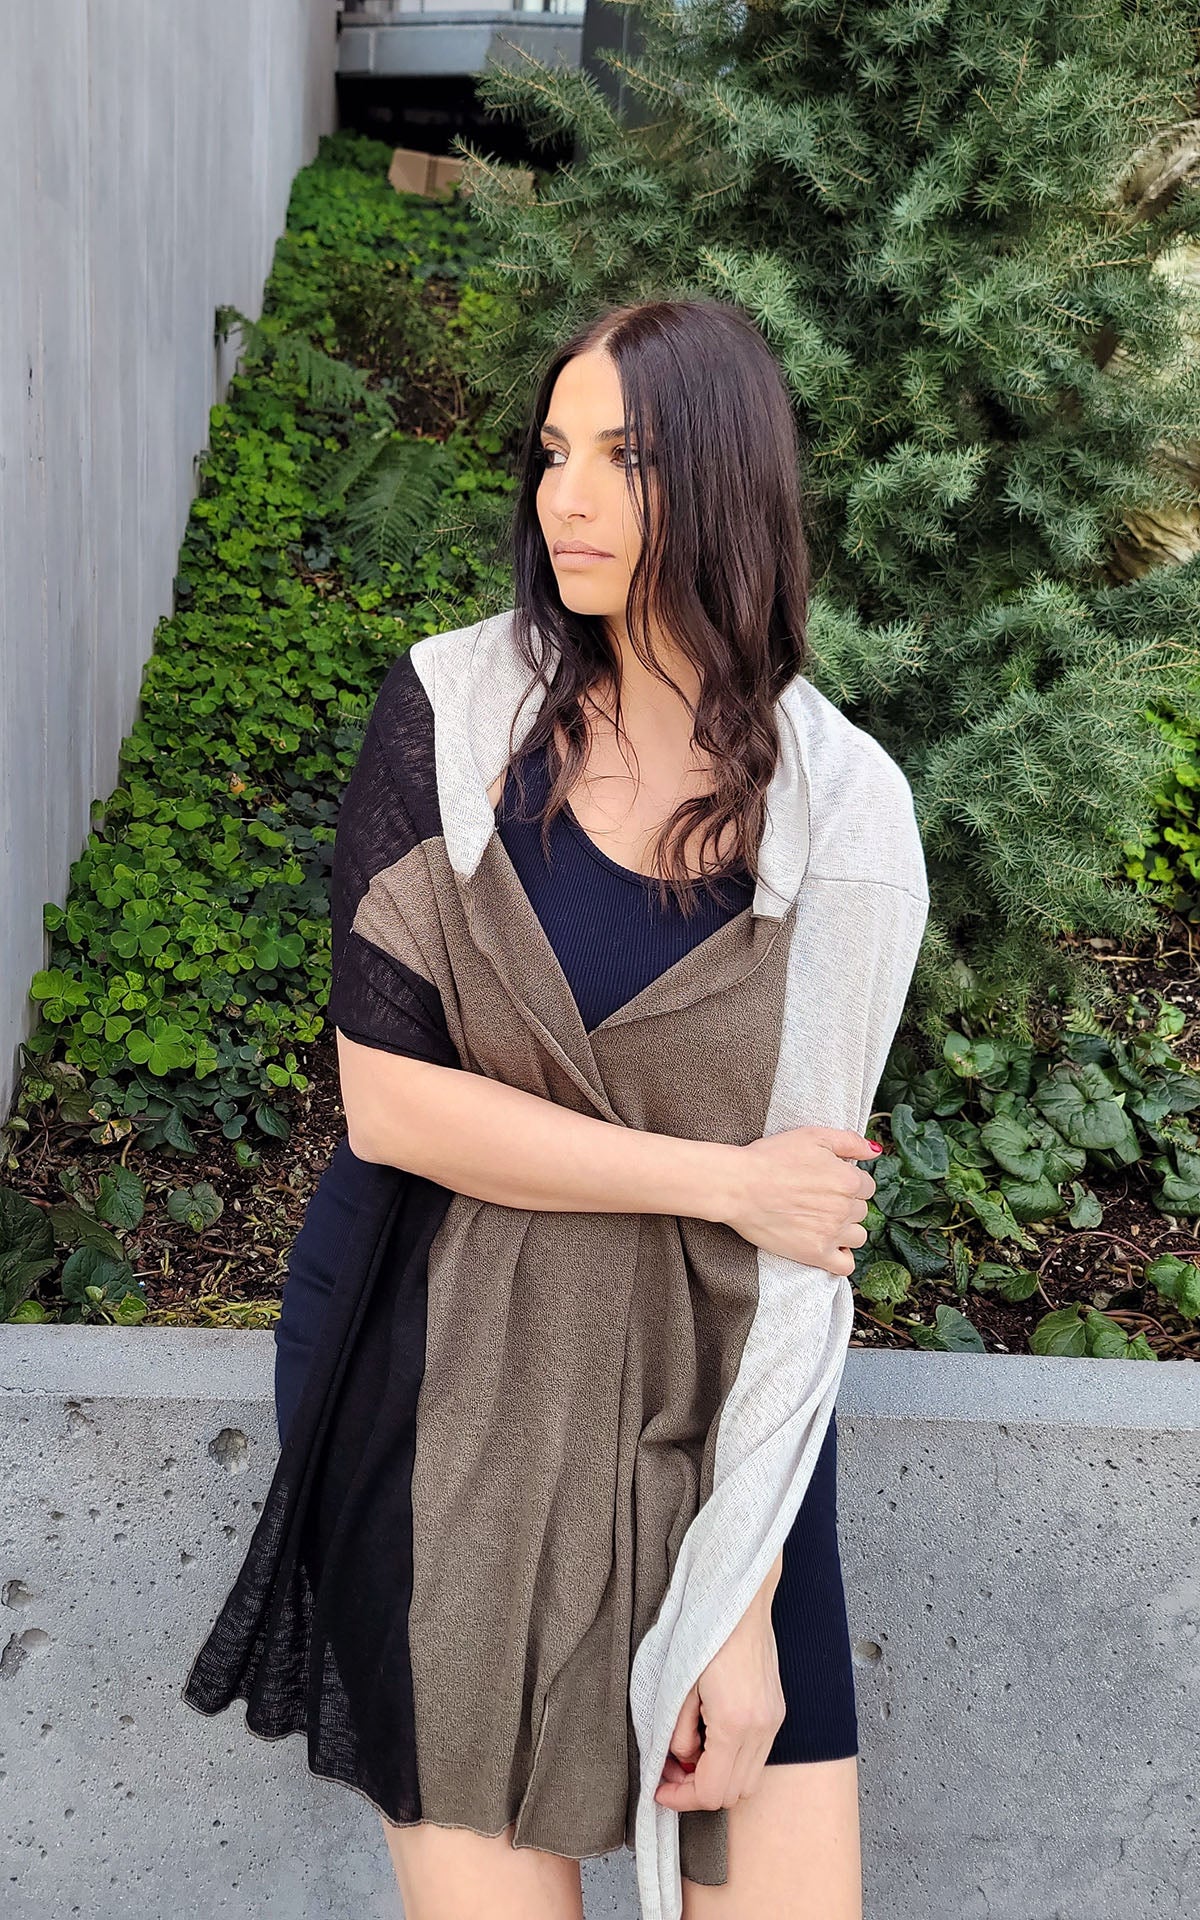 Upcycled Motley Scarf in Mezcal Sandstone and Scorpion on Woman. Large pattern showing open around neck. Handmade in Seattle, WA.